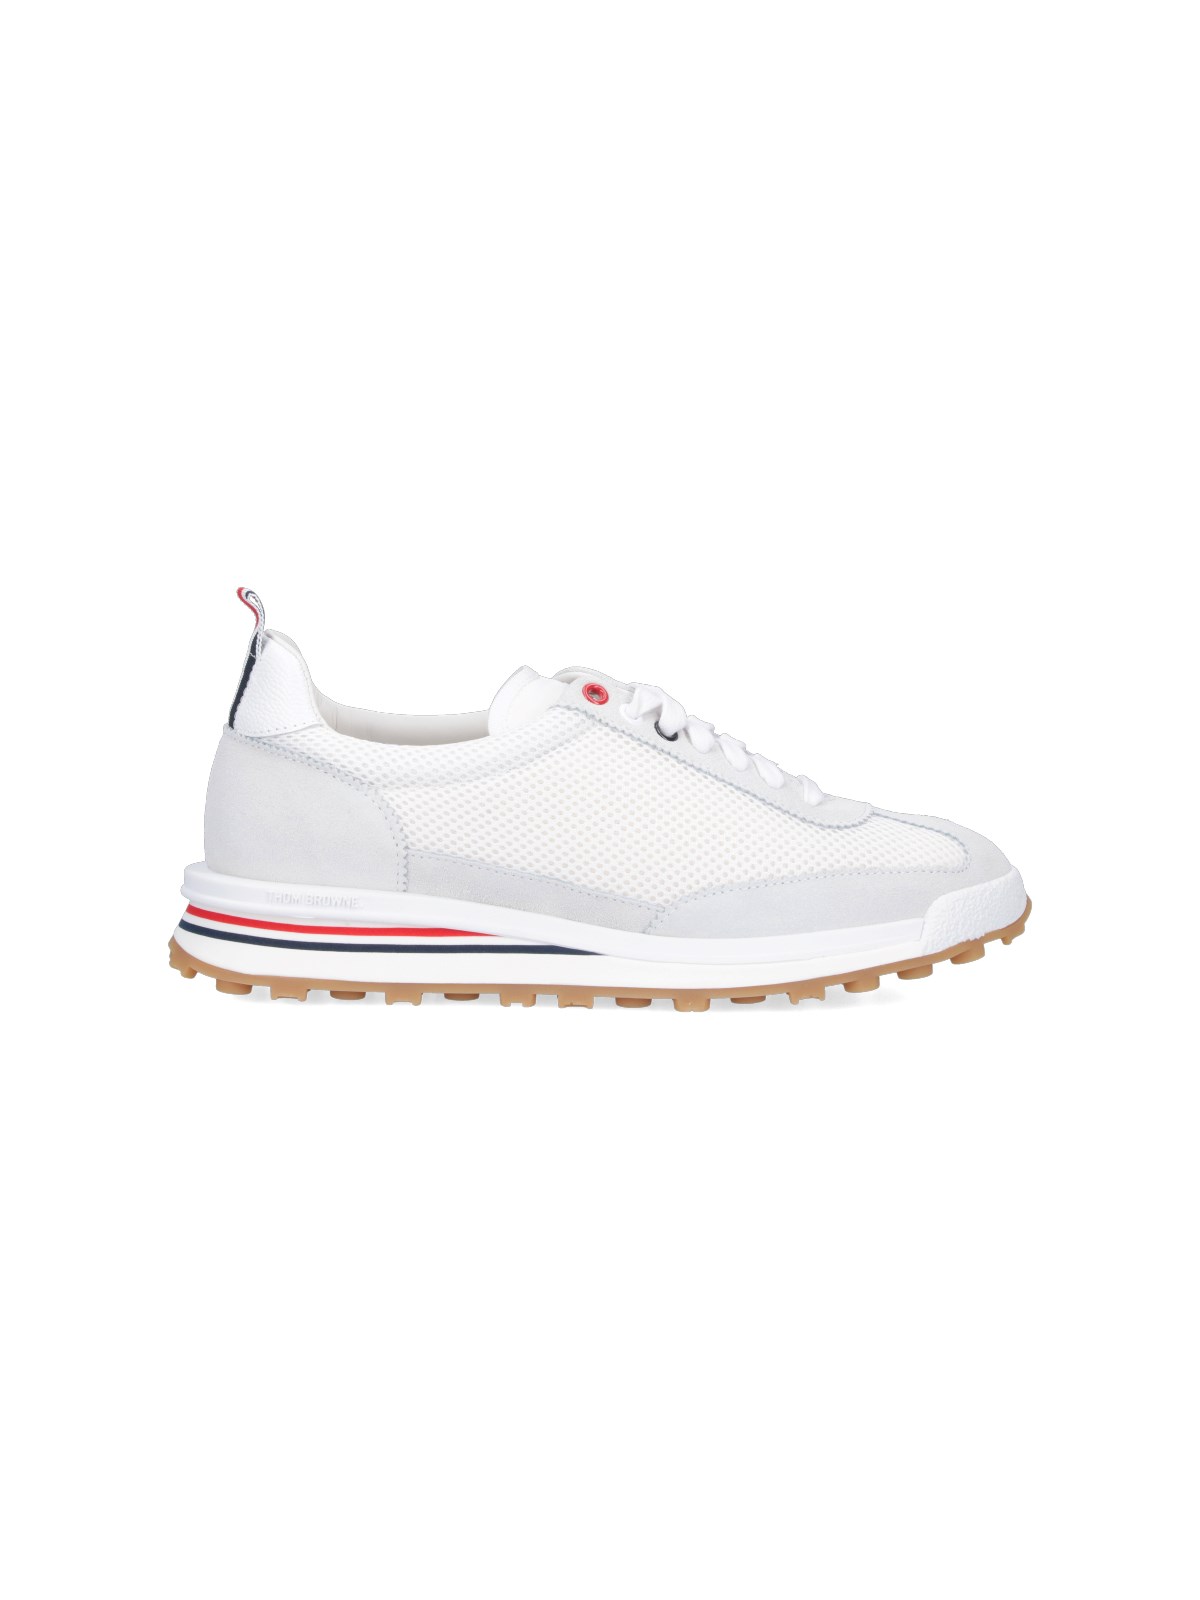 Thom Browne "tech Runner" Sneakers In White